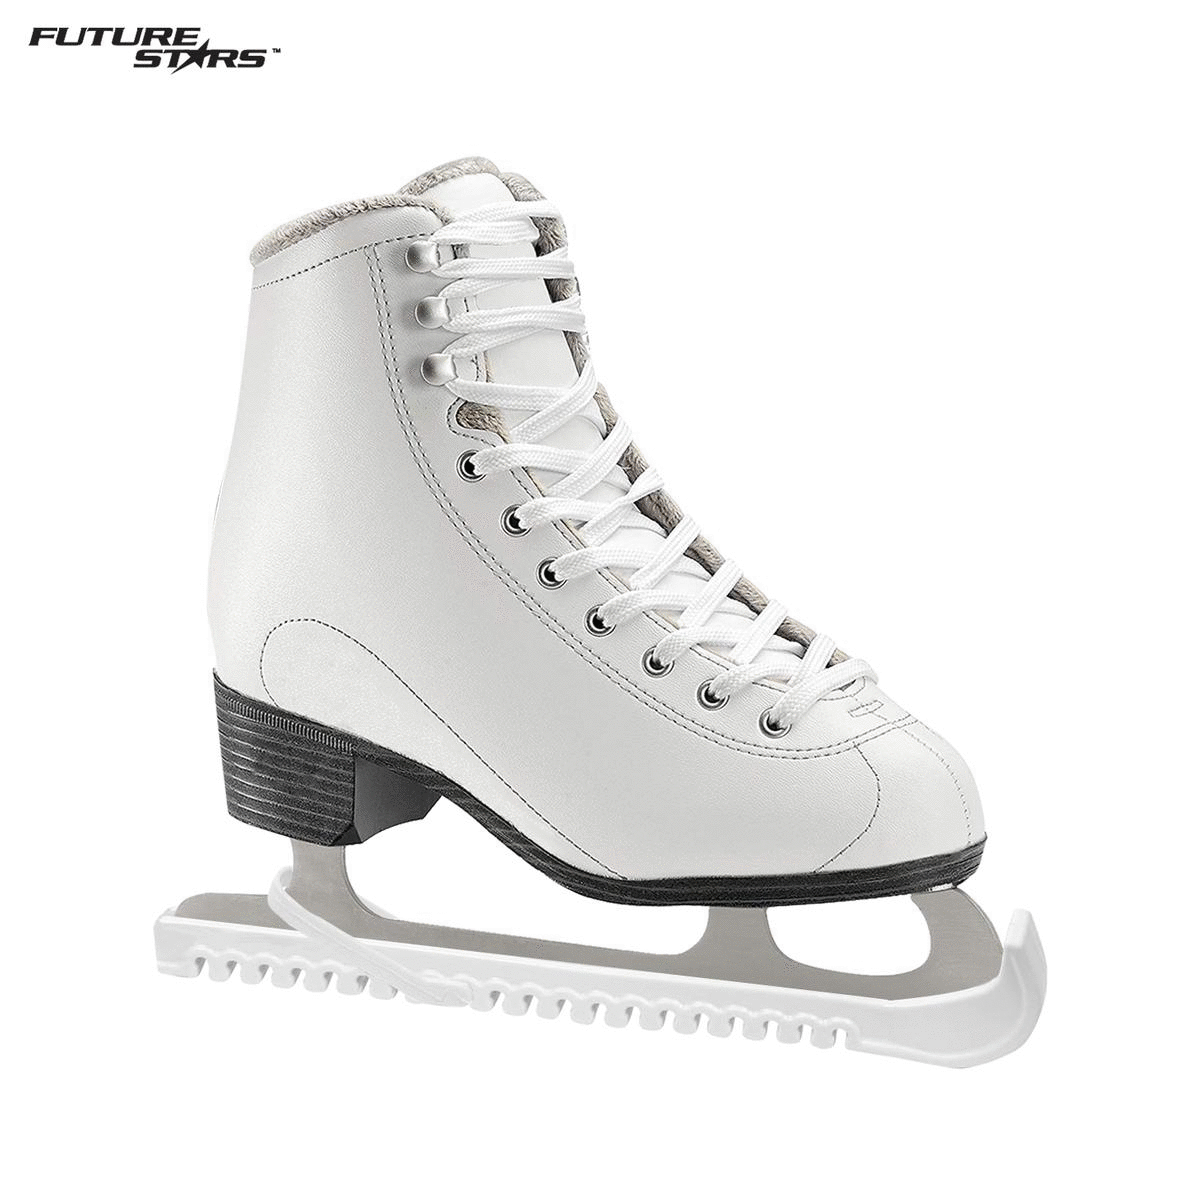 P Prettyia Ice Skate Blade Covers Guards for Hockey Skates and Ice Skates one size fits most size from 28-36 Skating Soakers Protectors Figure Skates